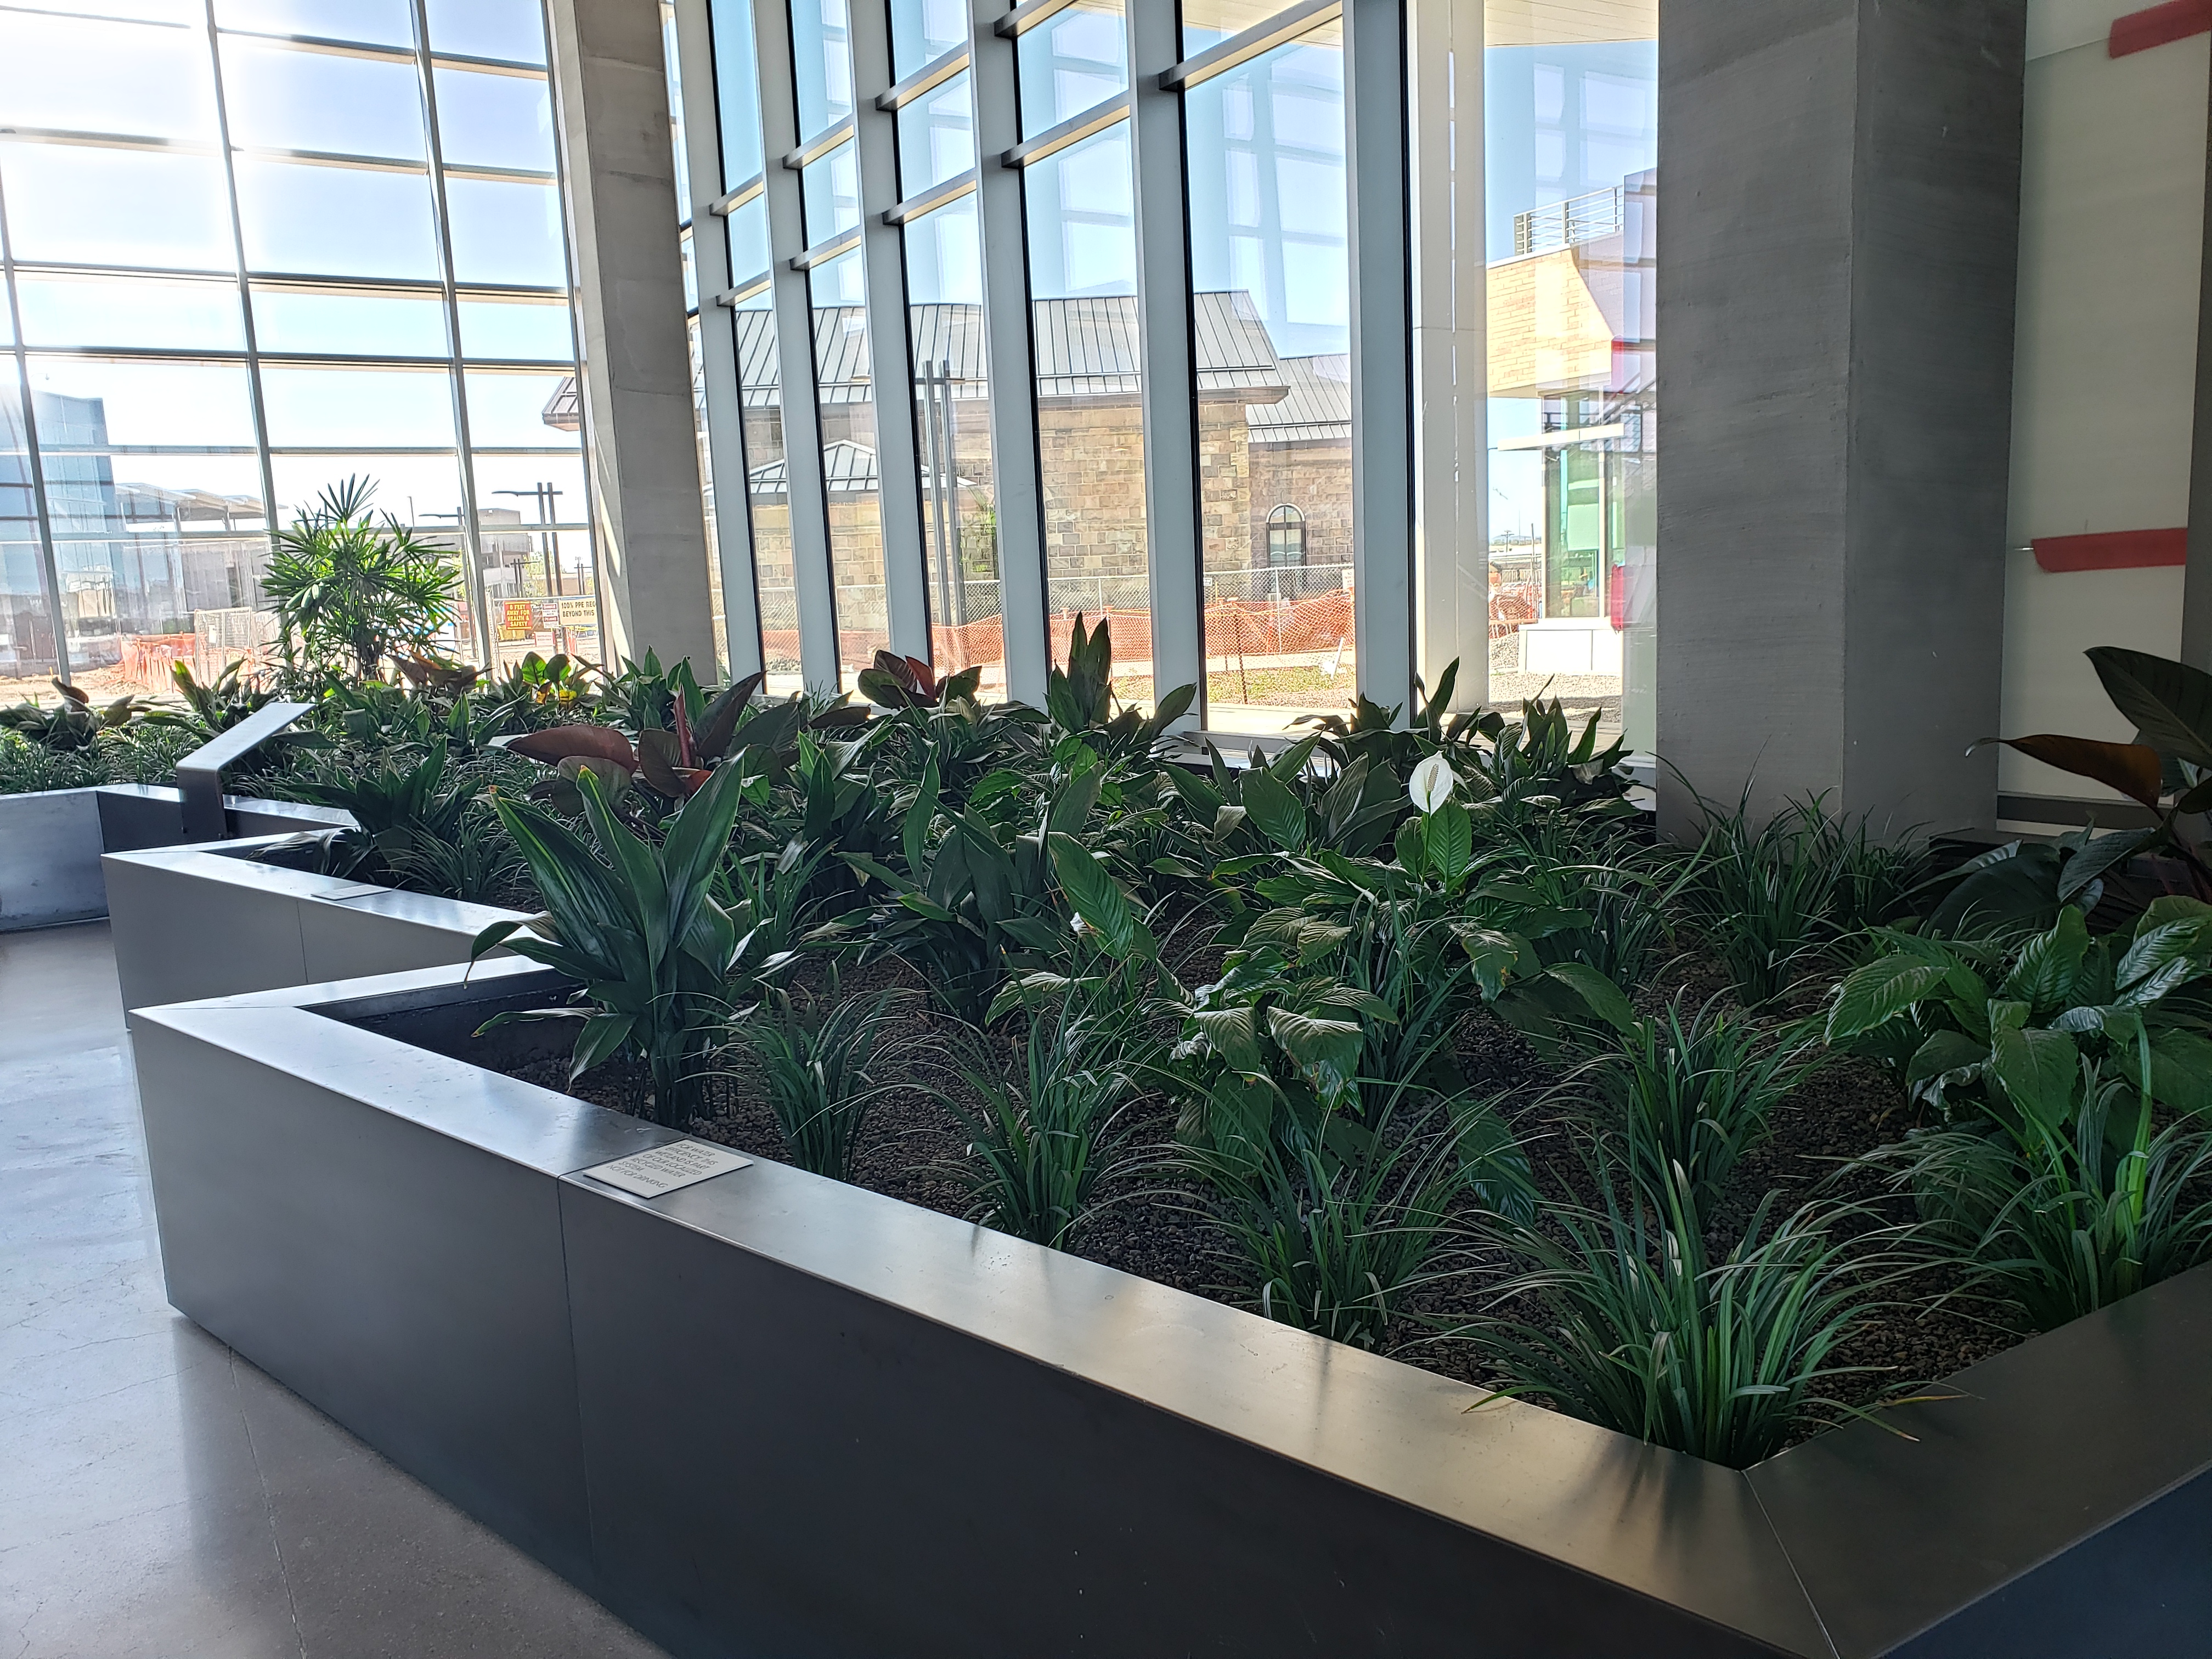 The Administration Building has an on-site wastewater treatment system, ReUse For Us (RUFUS), that utilizes the plants in the lobby to help purify the water. 